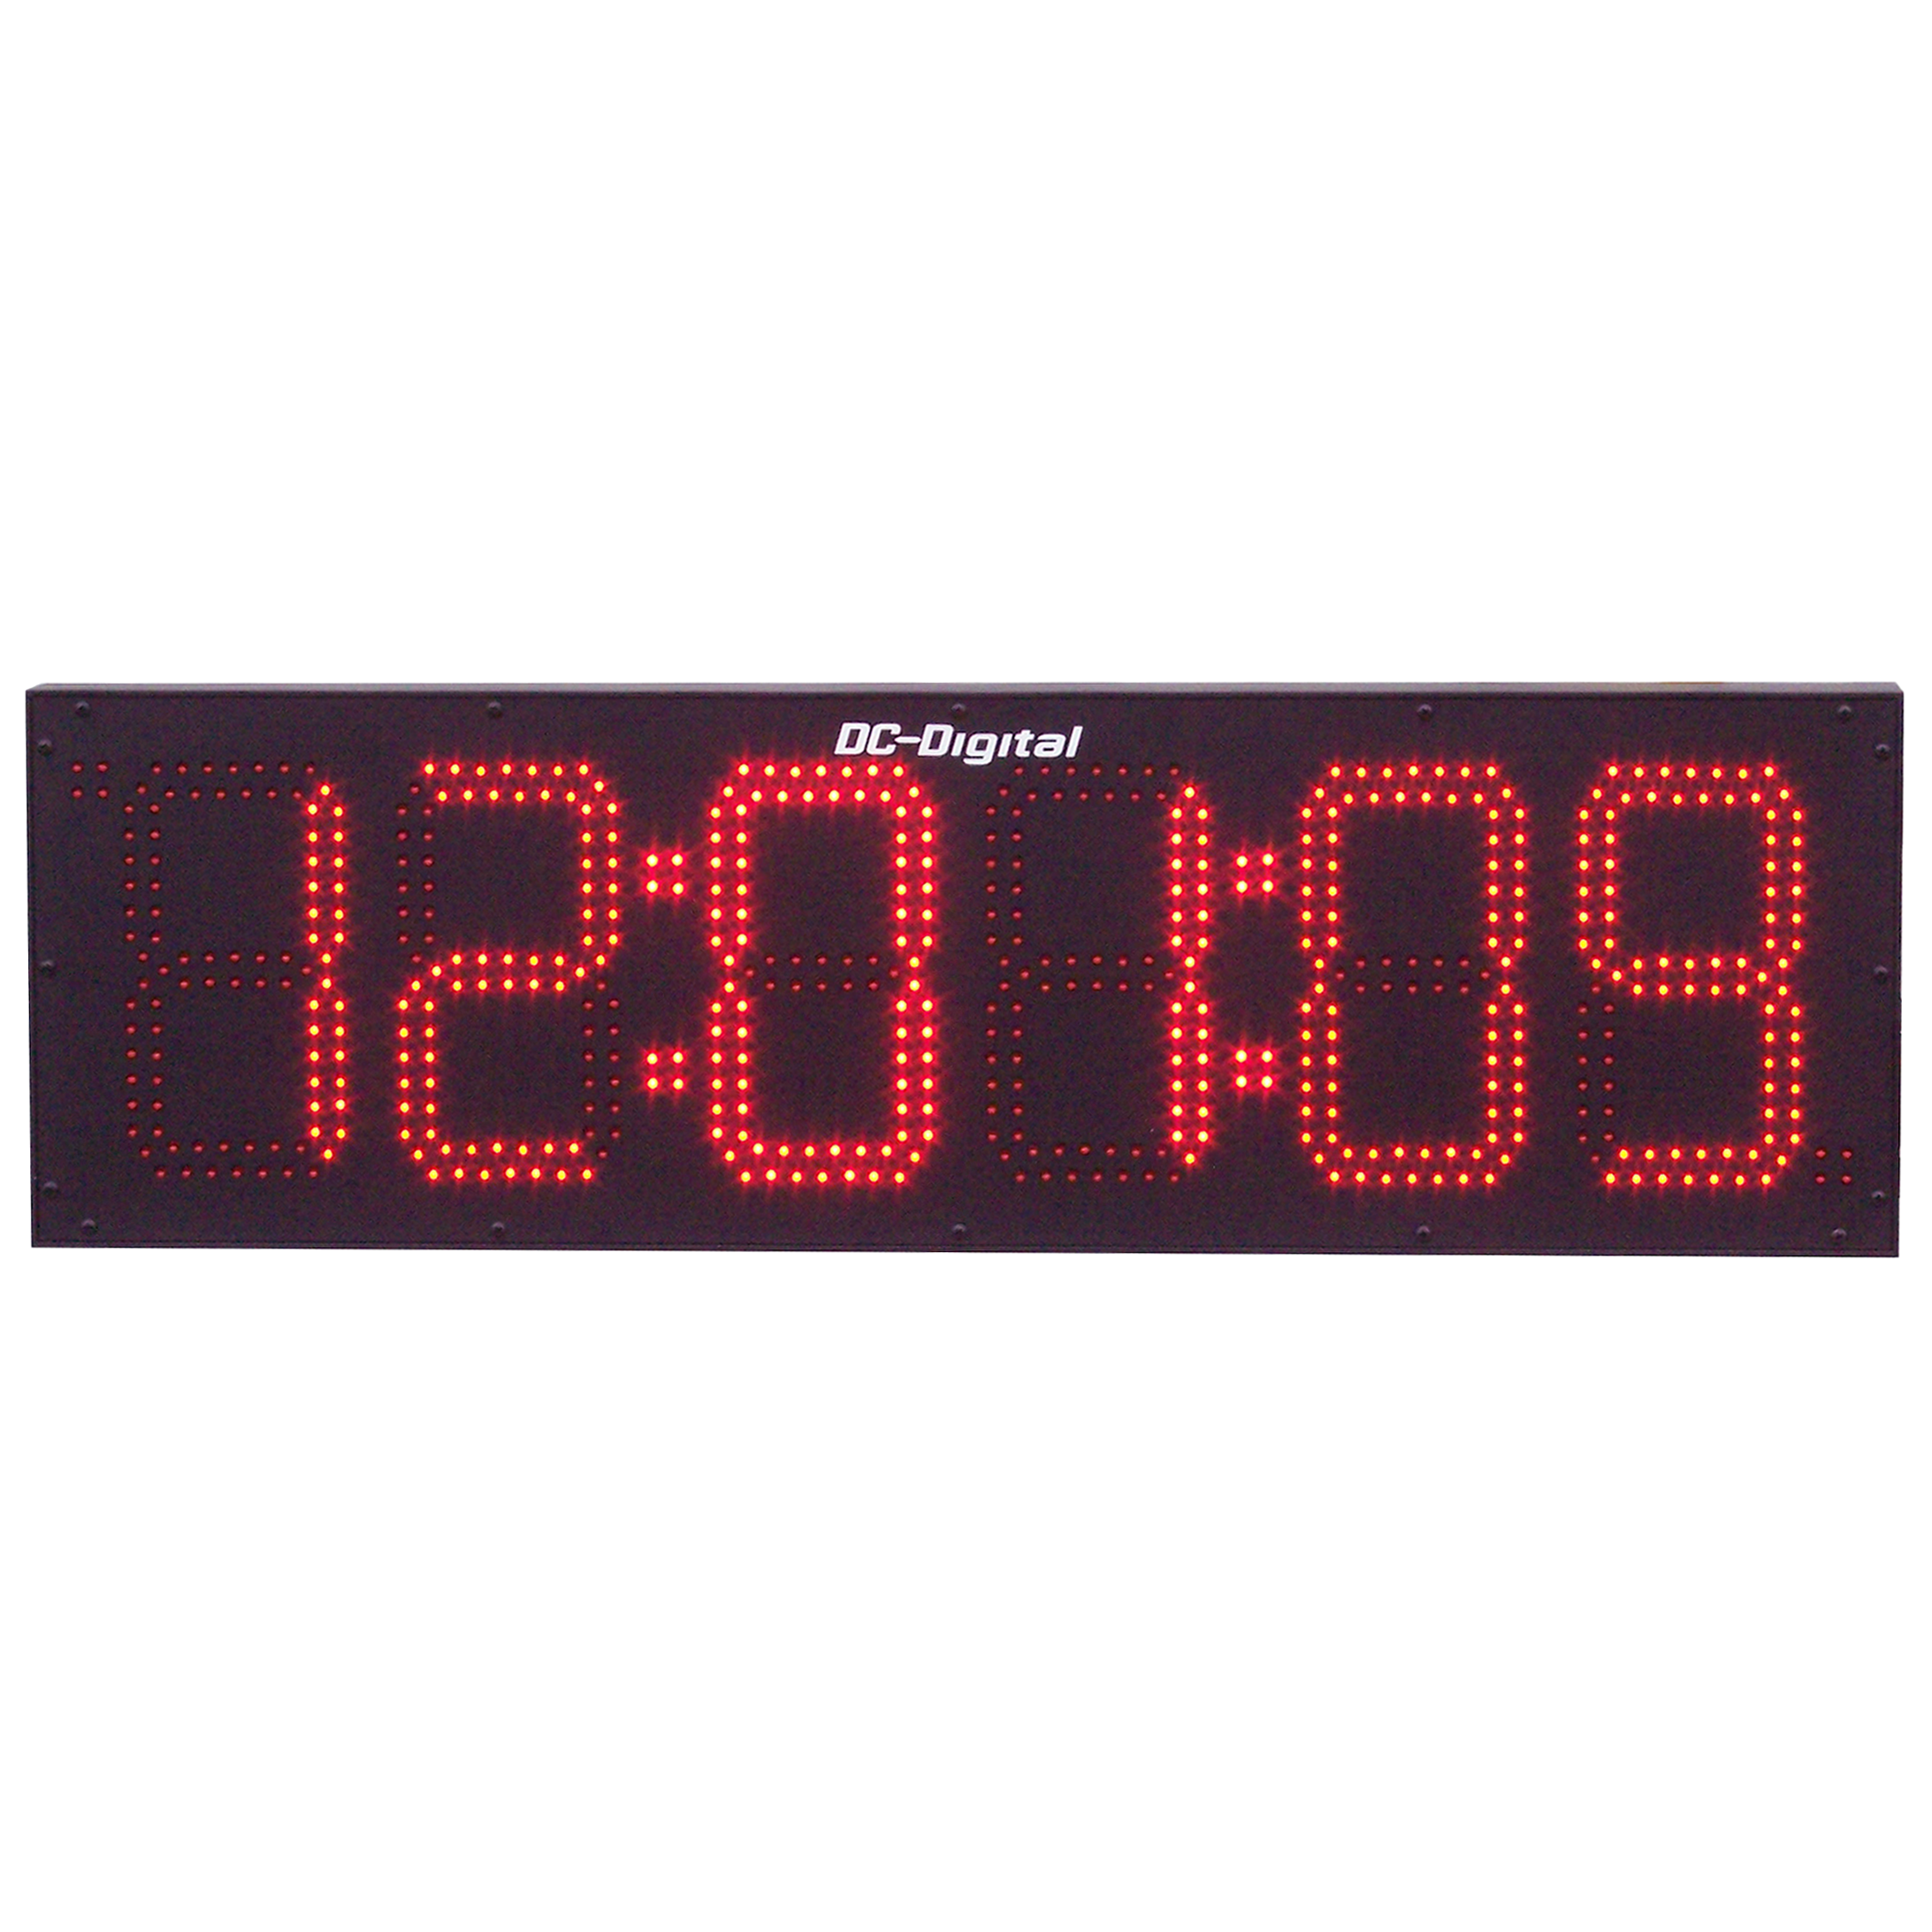 (DC-806N-IN) 8.0 Inch LED, 6 Digit, Network NTP Server Synchronized, Web Page Configurable, Atomic Digital Time of Day Clock (INDOOR)